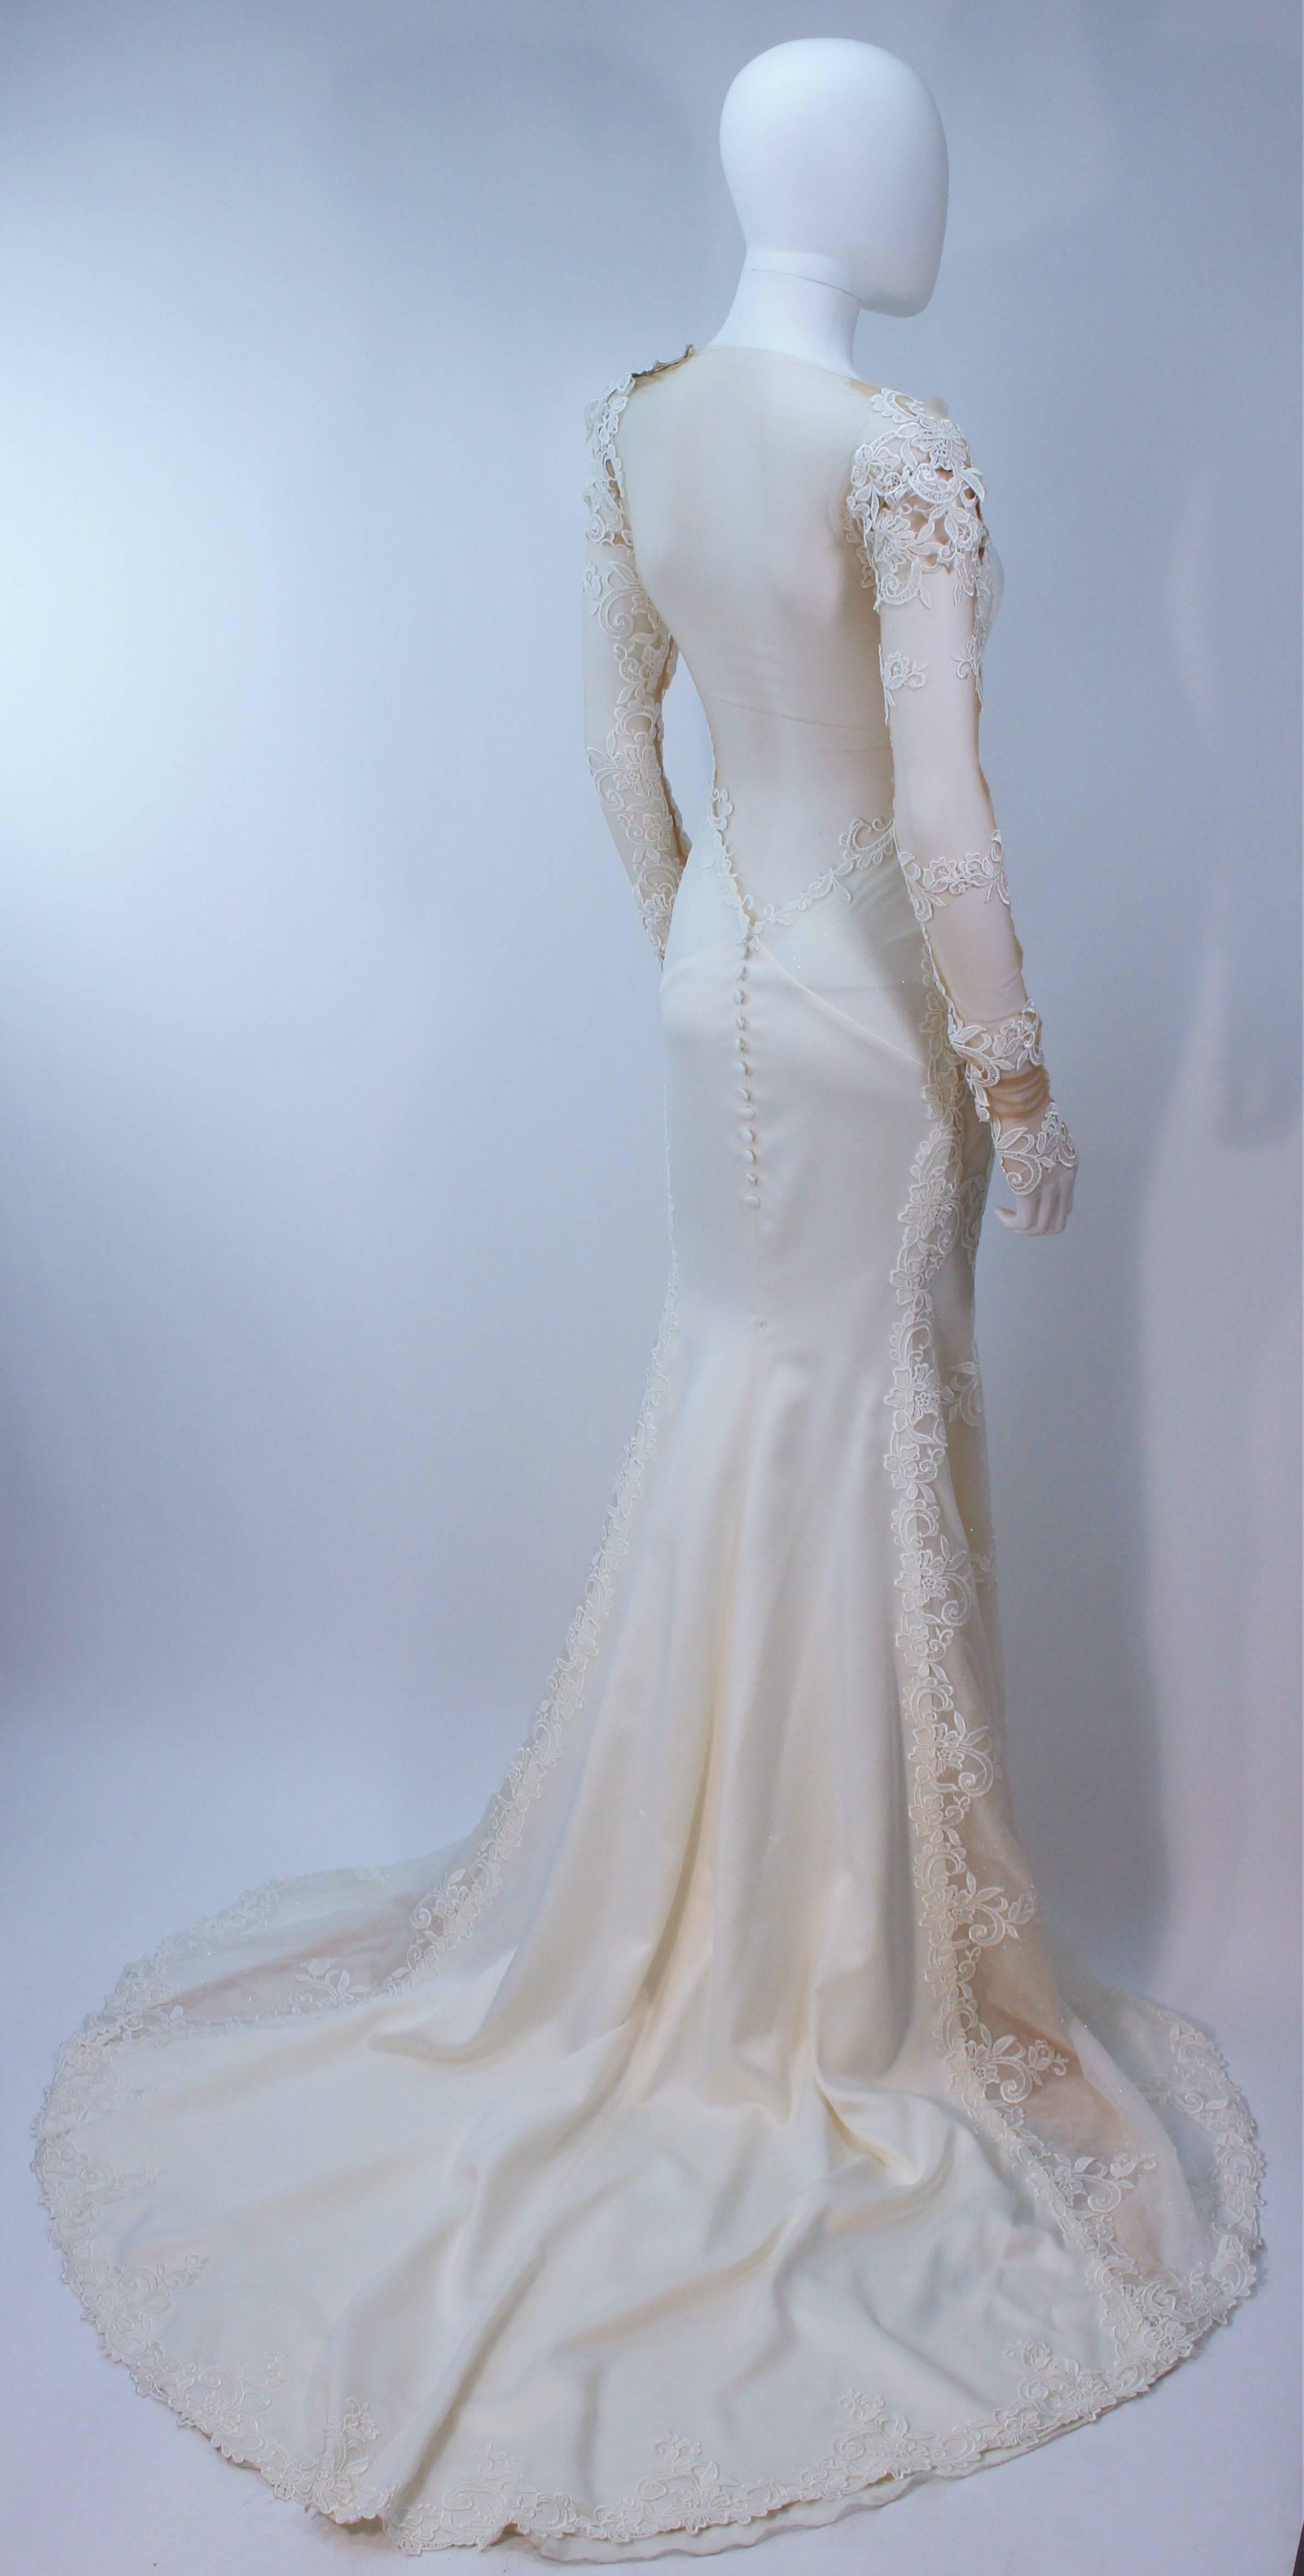 GALIA LAHAV Couture White Floral Lace Gown with Train and Sheer Details Size 2 3